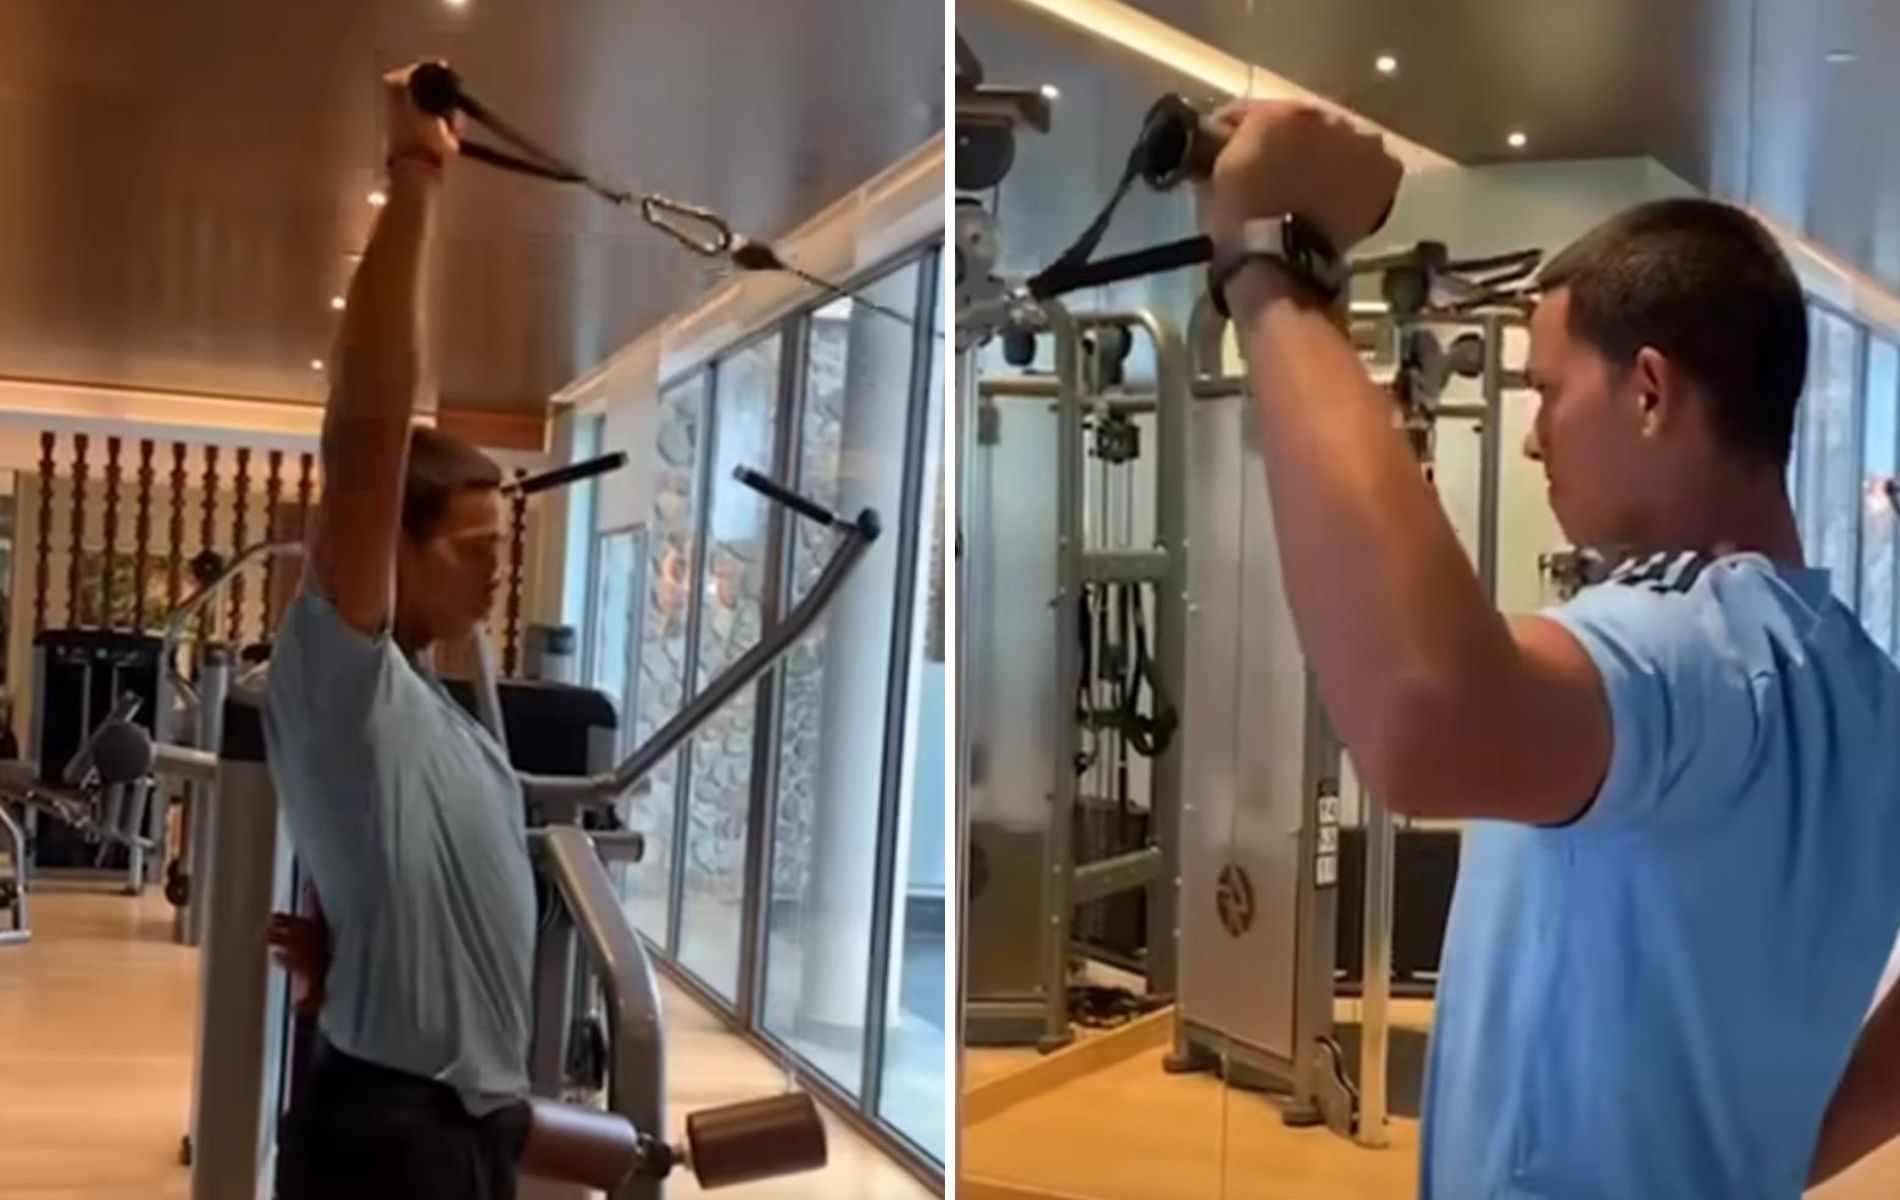 Yashasvi Jaiswal during a workout session. (Pics: Instagram)